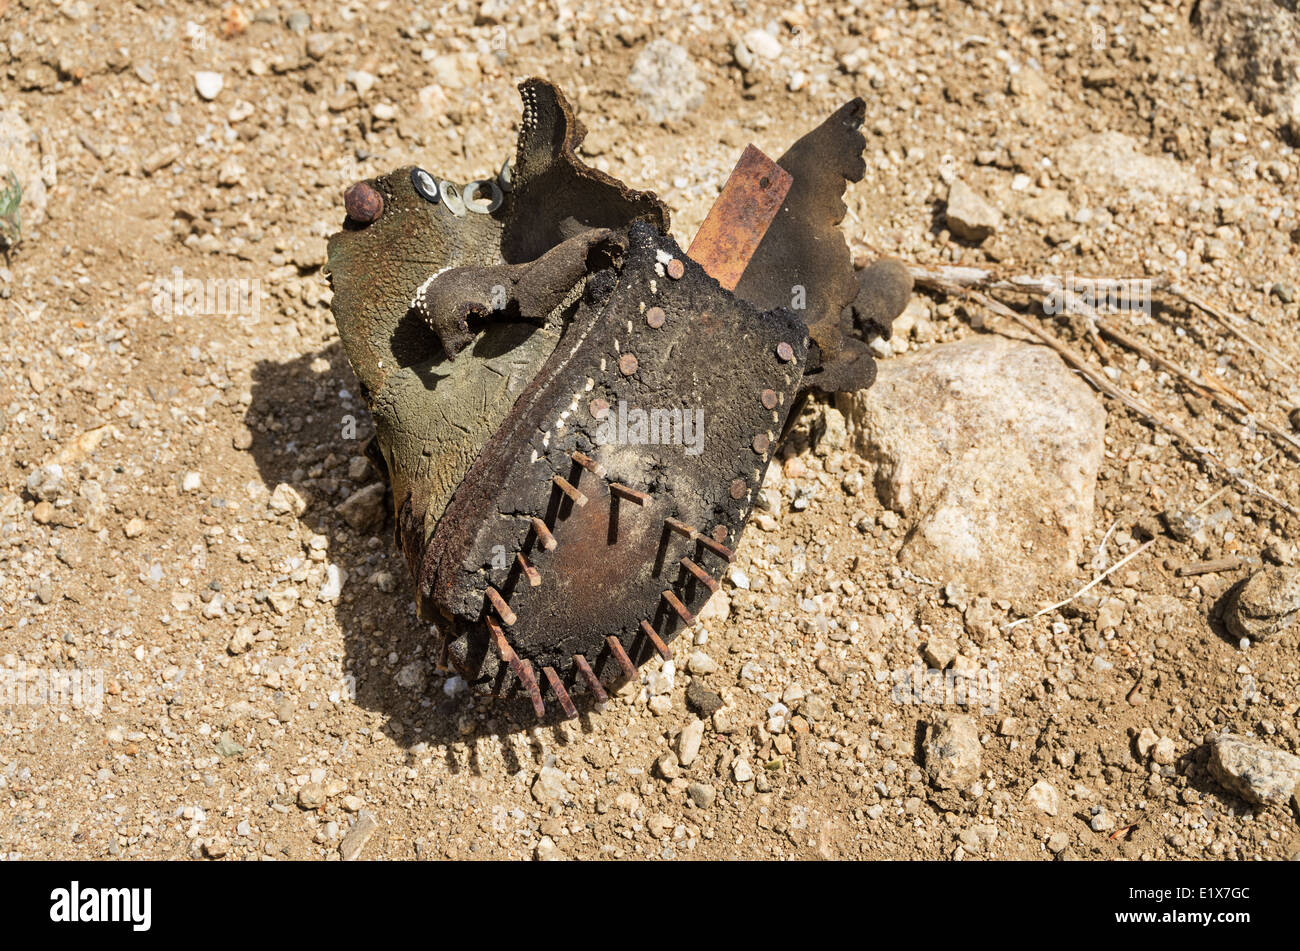 the remains of an old shoe left out in the desert Stock Photo